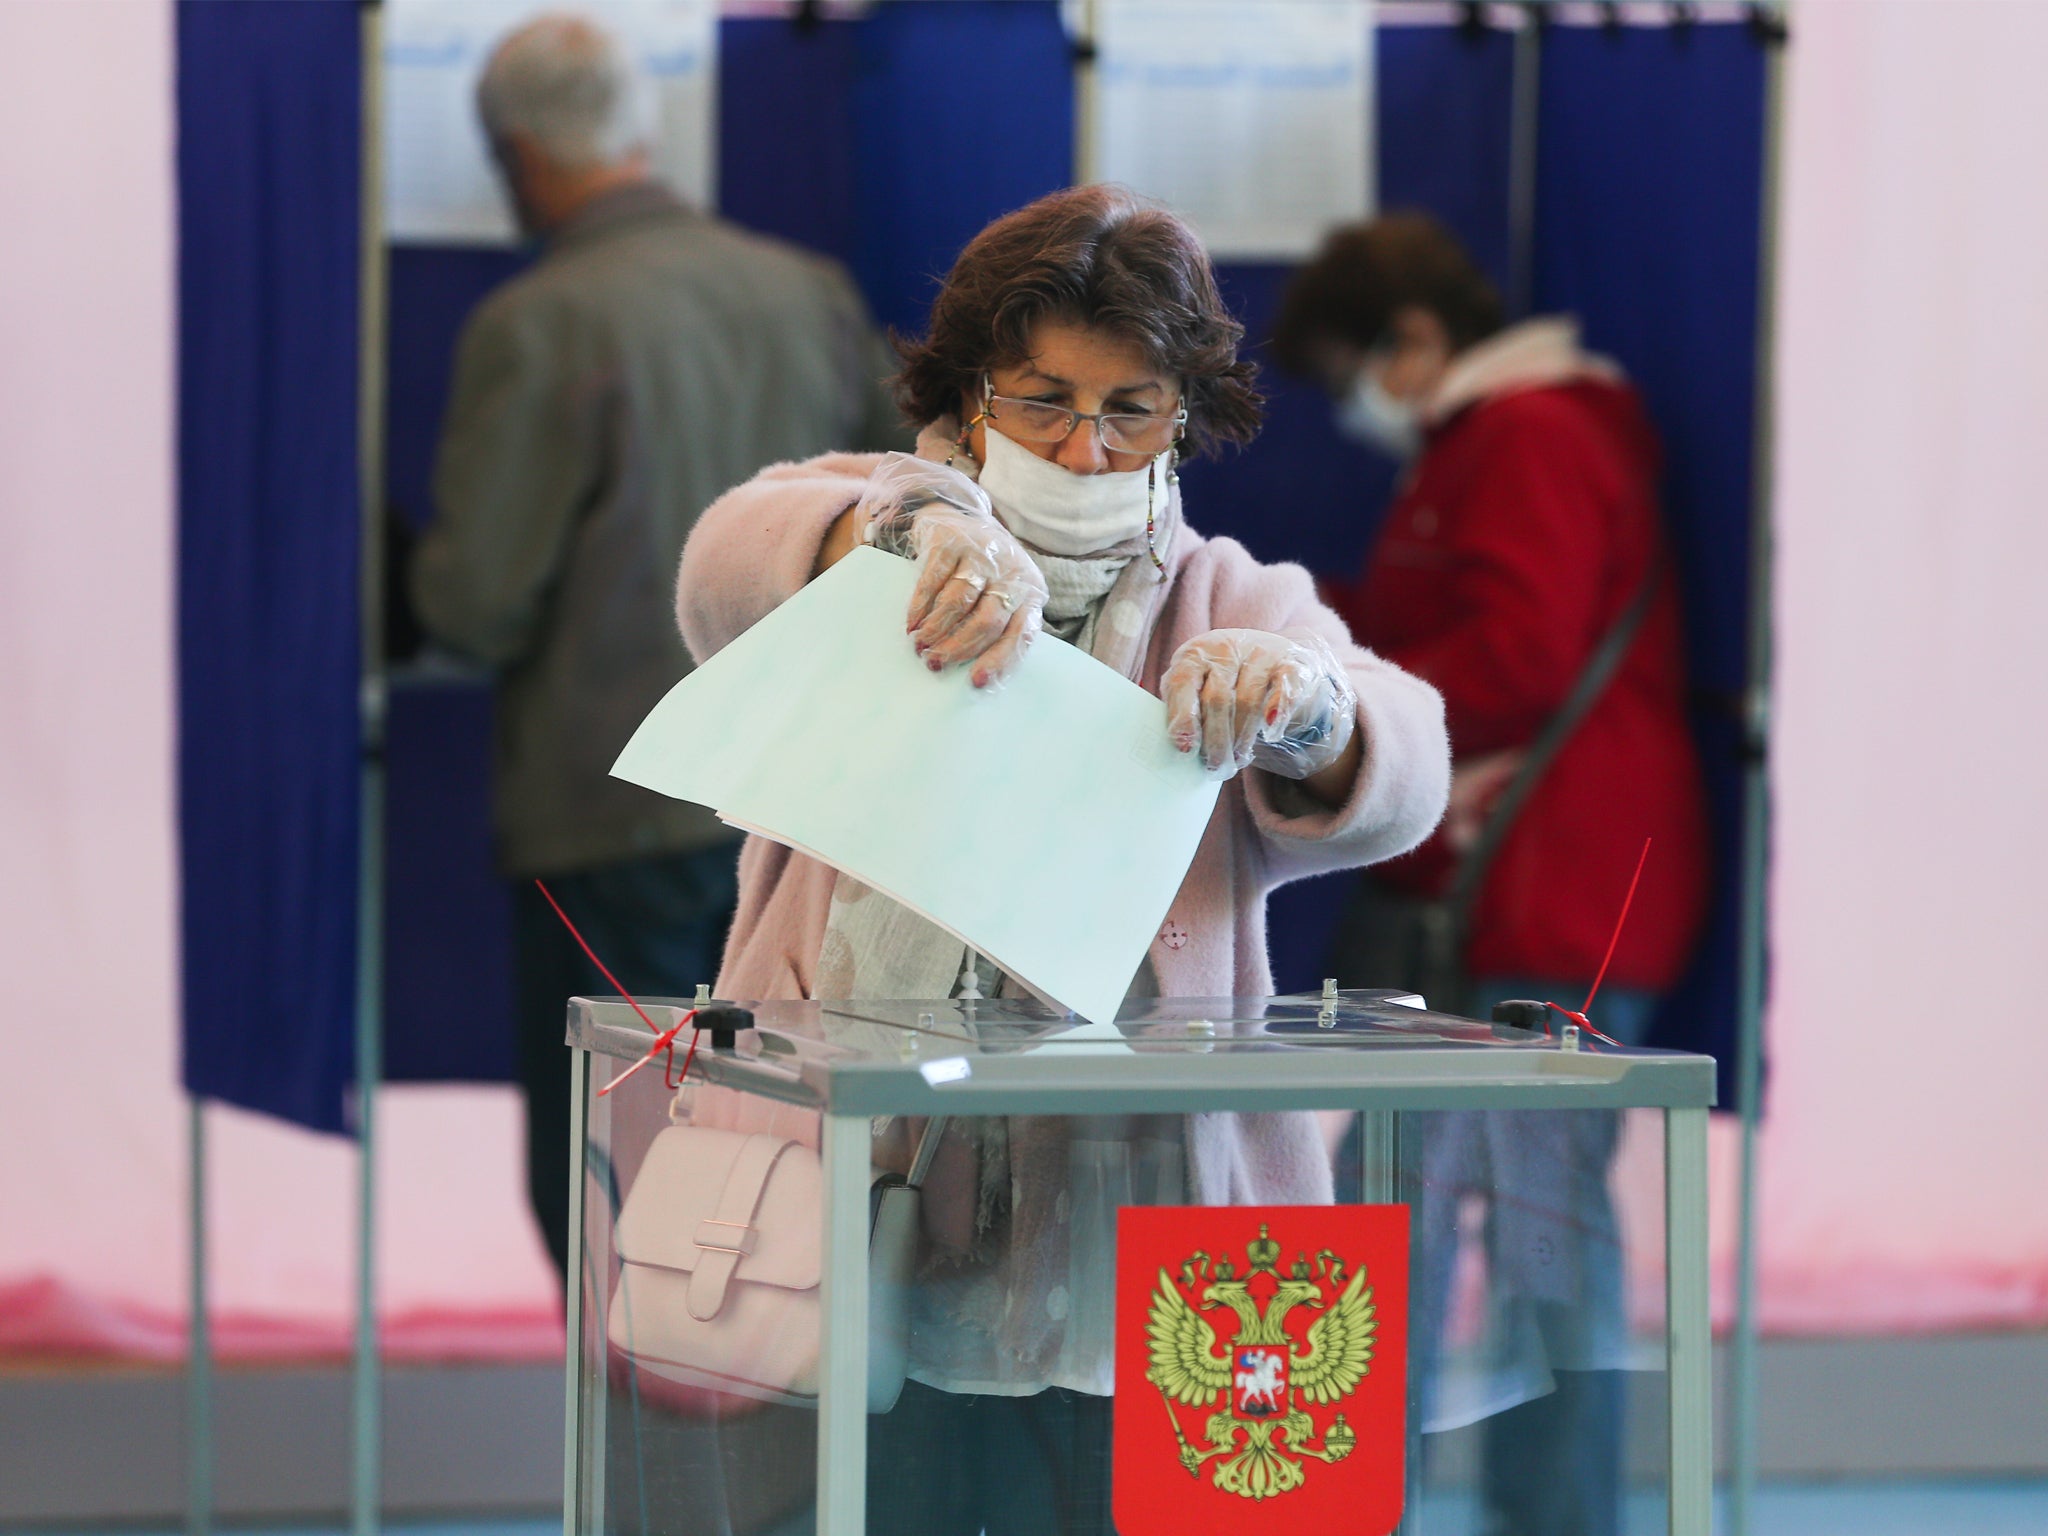 United Russia Party won just 32 per cent of the vote for regional parliament in Kostroma, where Povalikhino is located